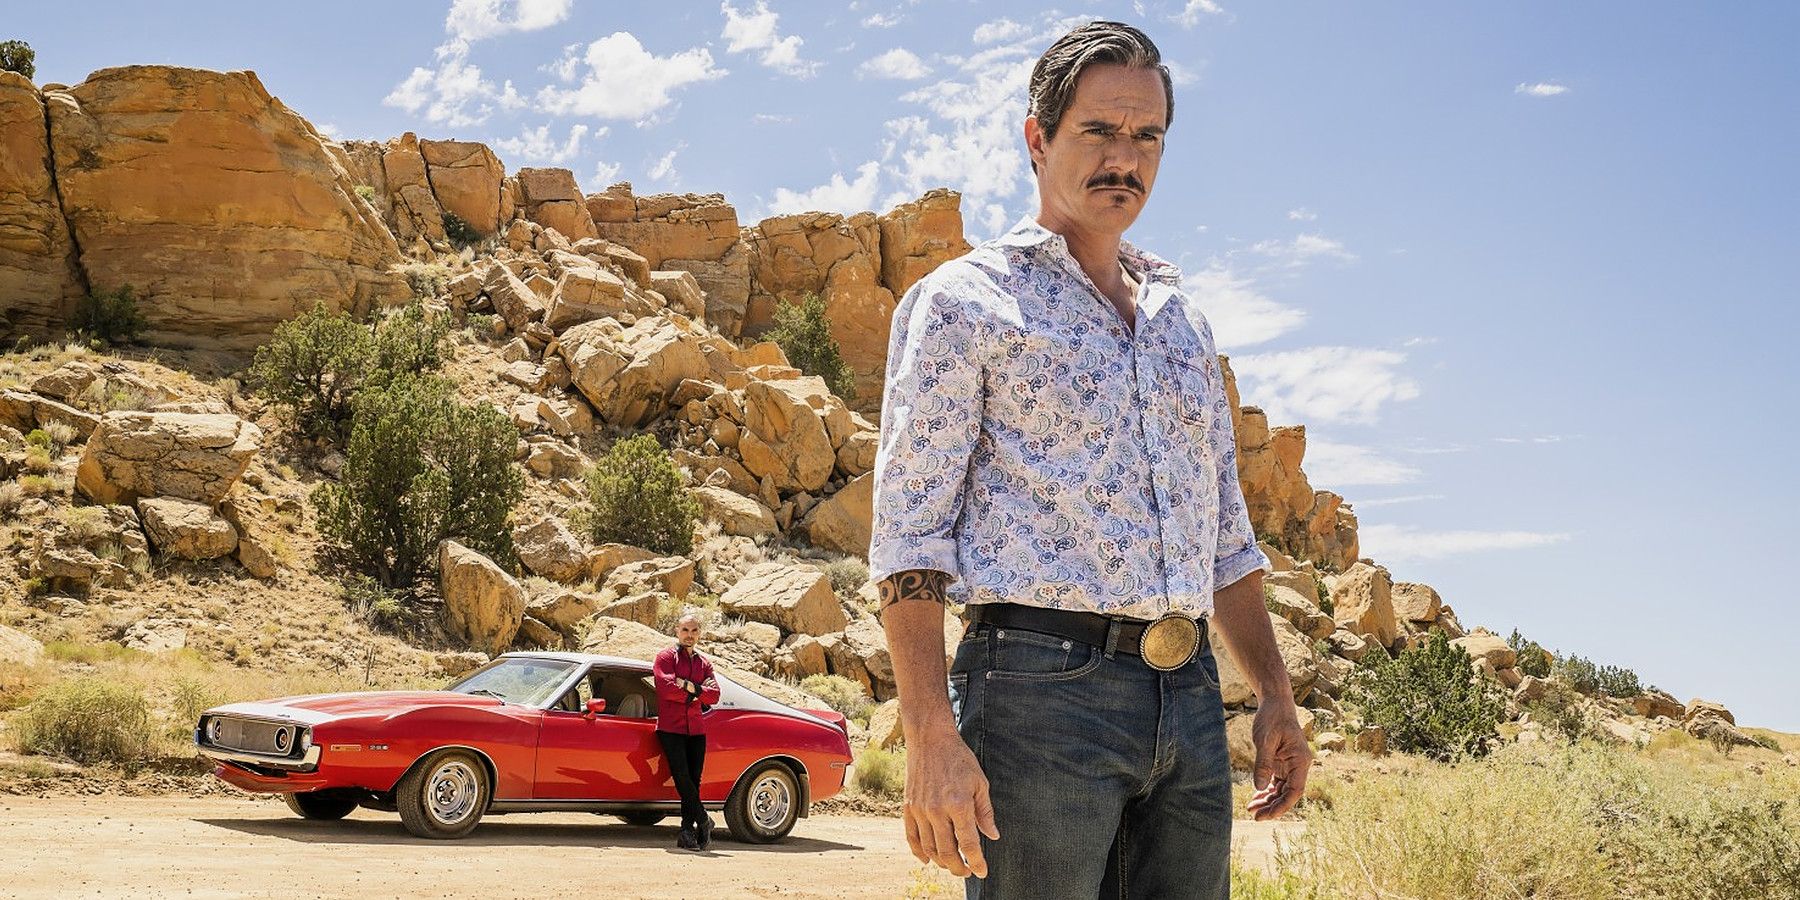 Lalo wanders around the desert in Better Call Saul